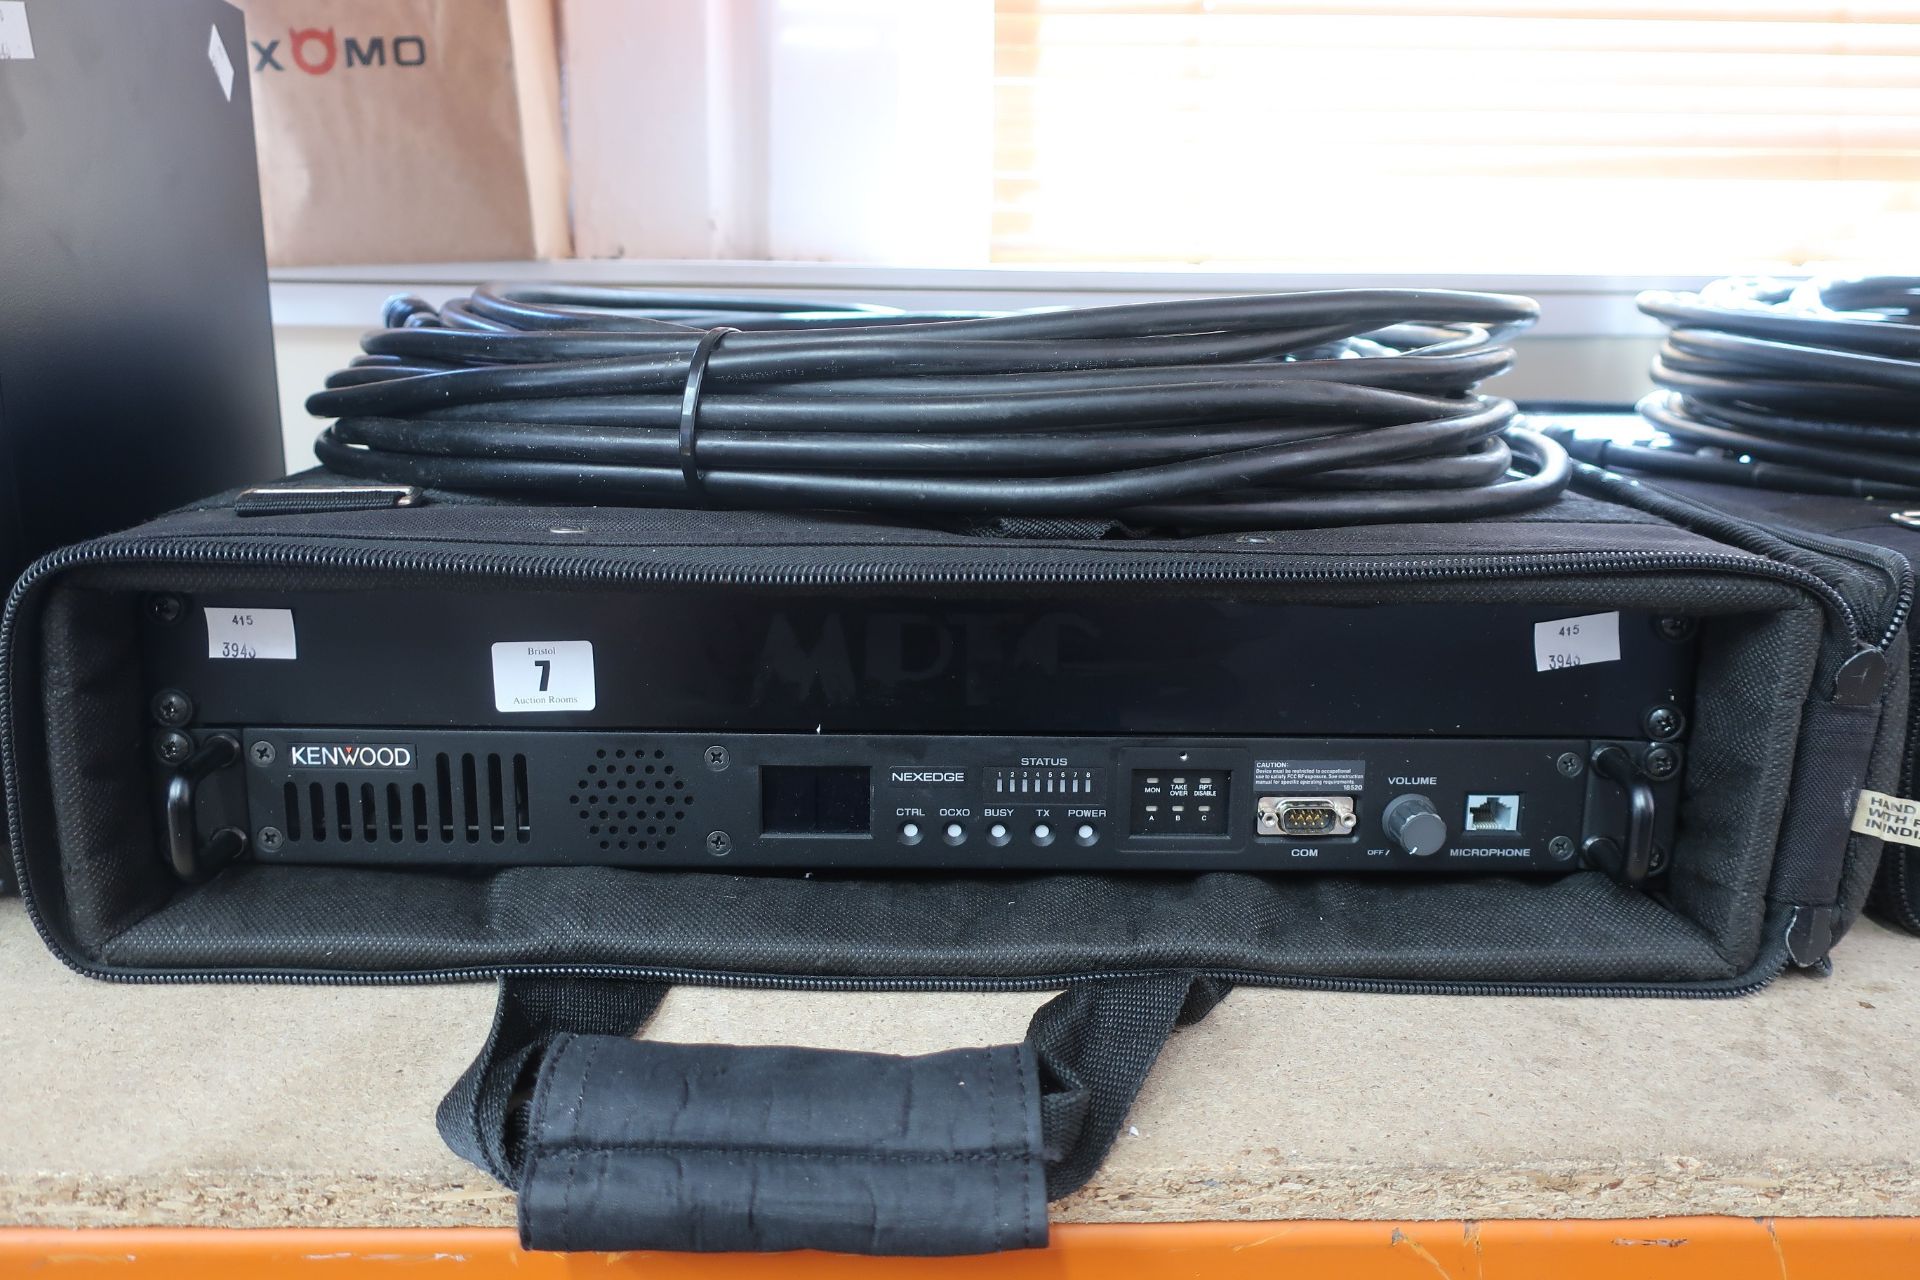 A pre-owned Kenwood NXR-700 NEXEDGE digital and analogue base station repeater in protective carry